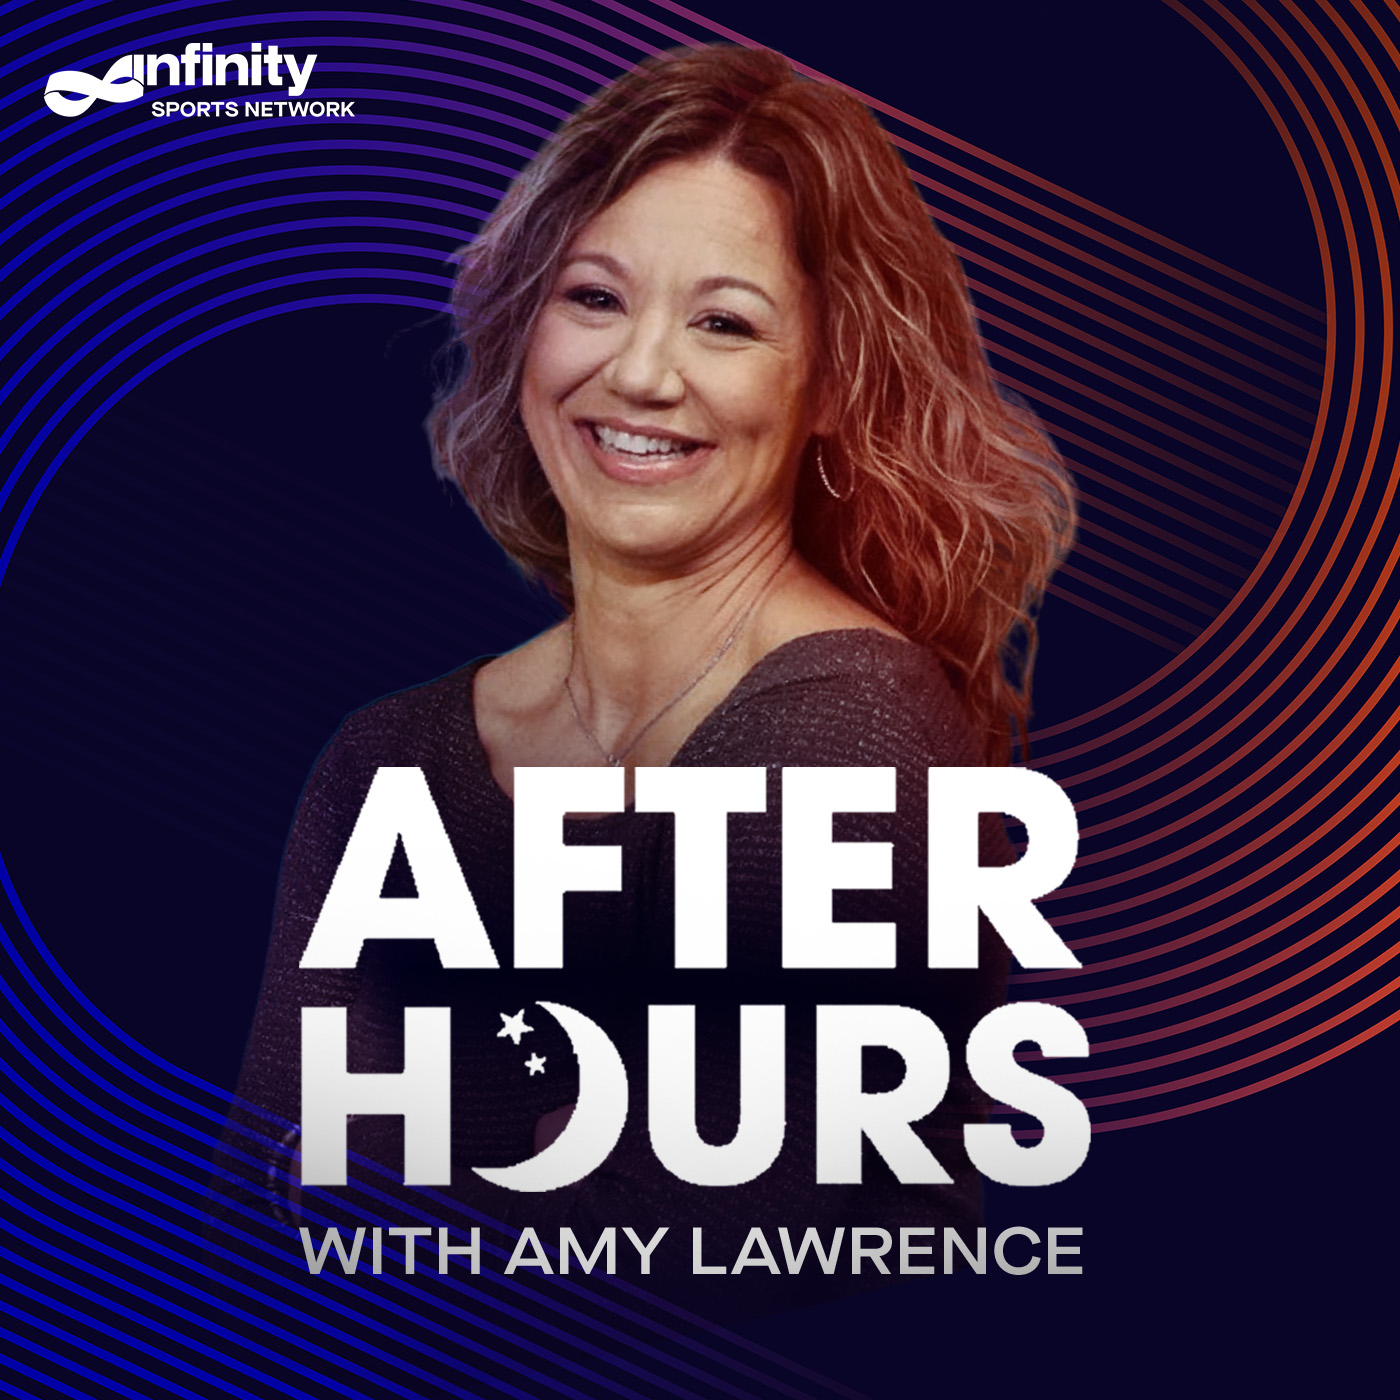 4/14/21 After Hours with Amy Lawrence PODCAST: Hour 4